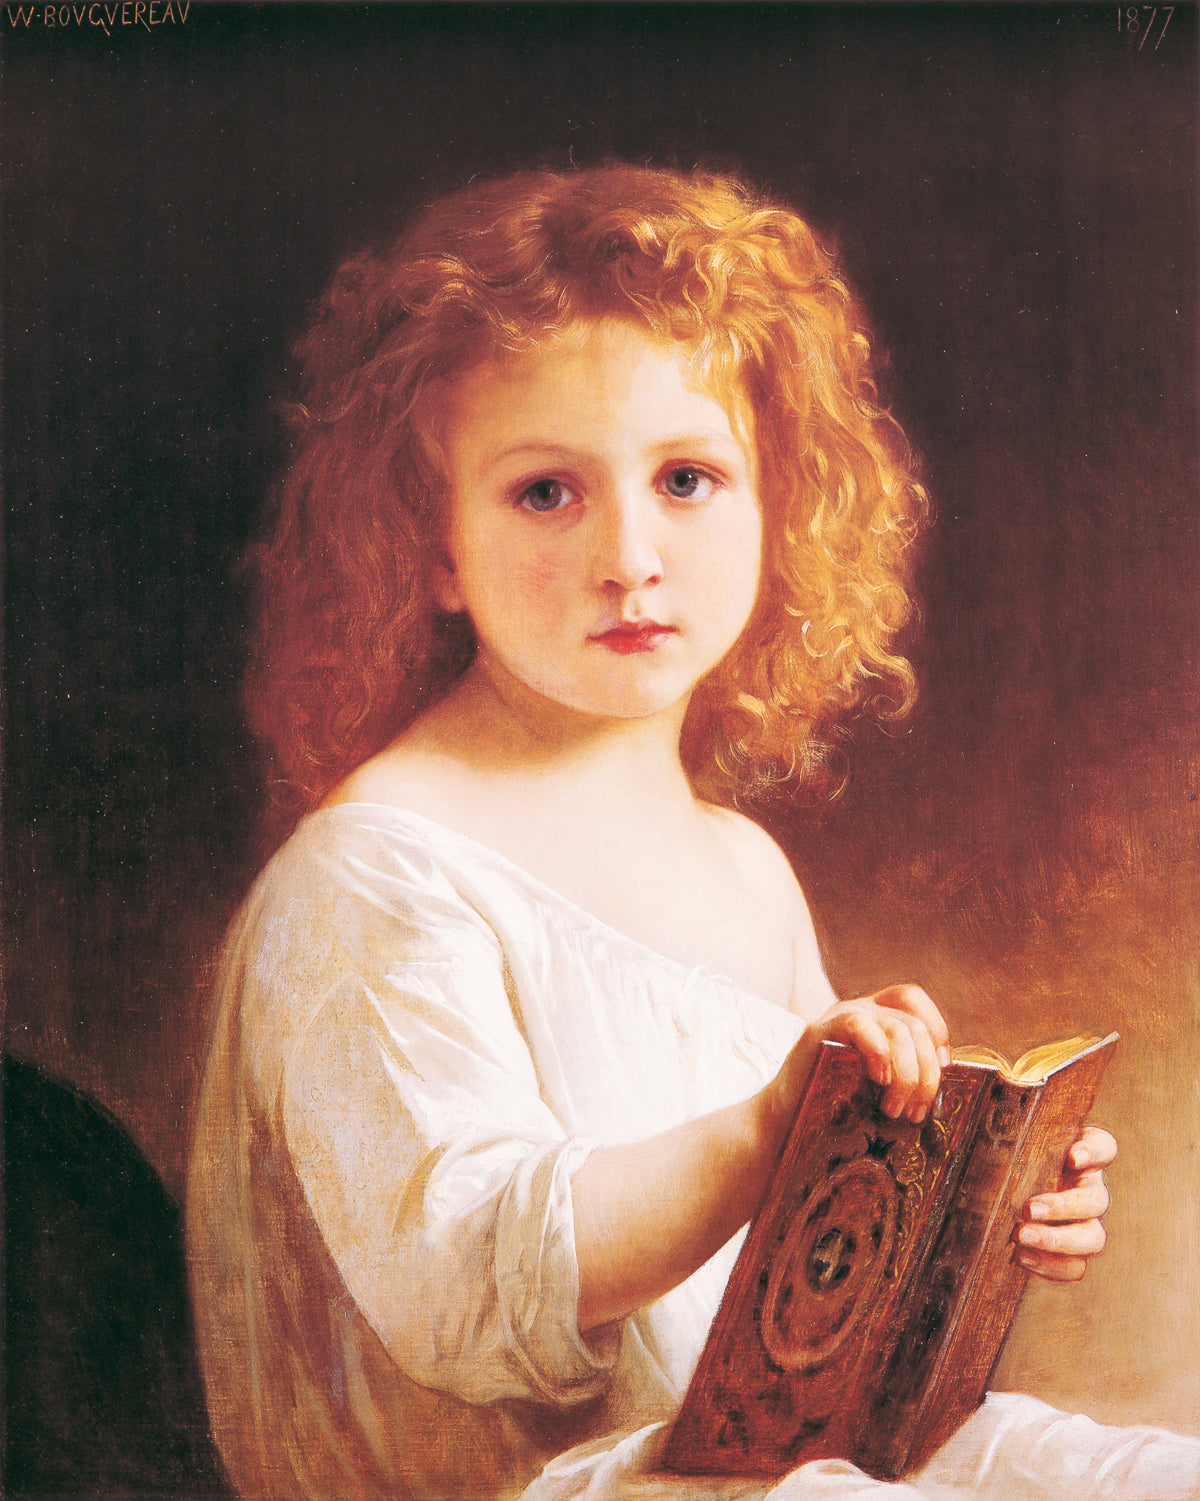 William Bouguereau - The story book